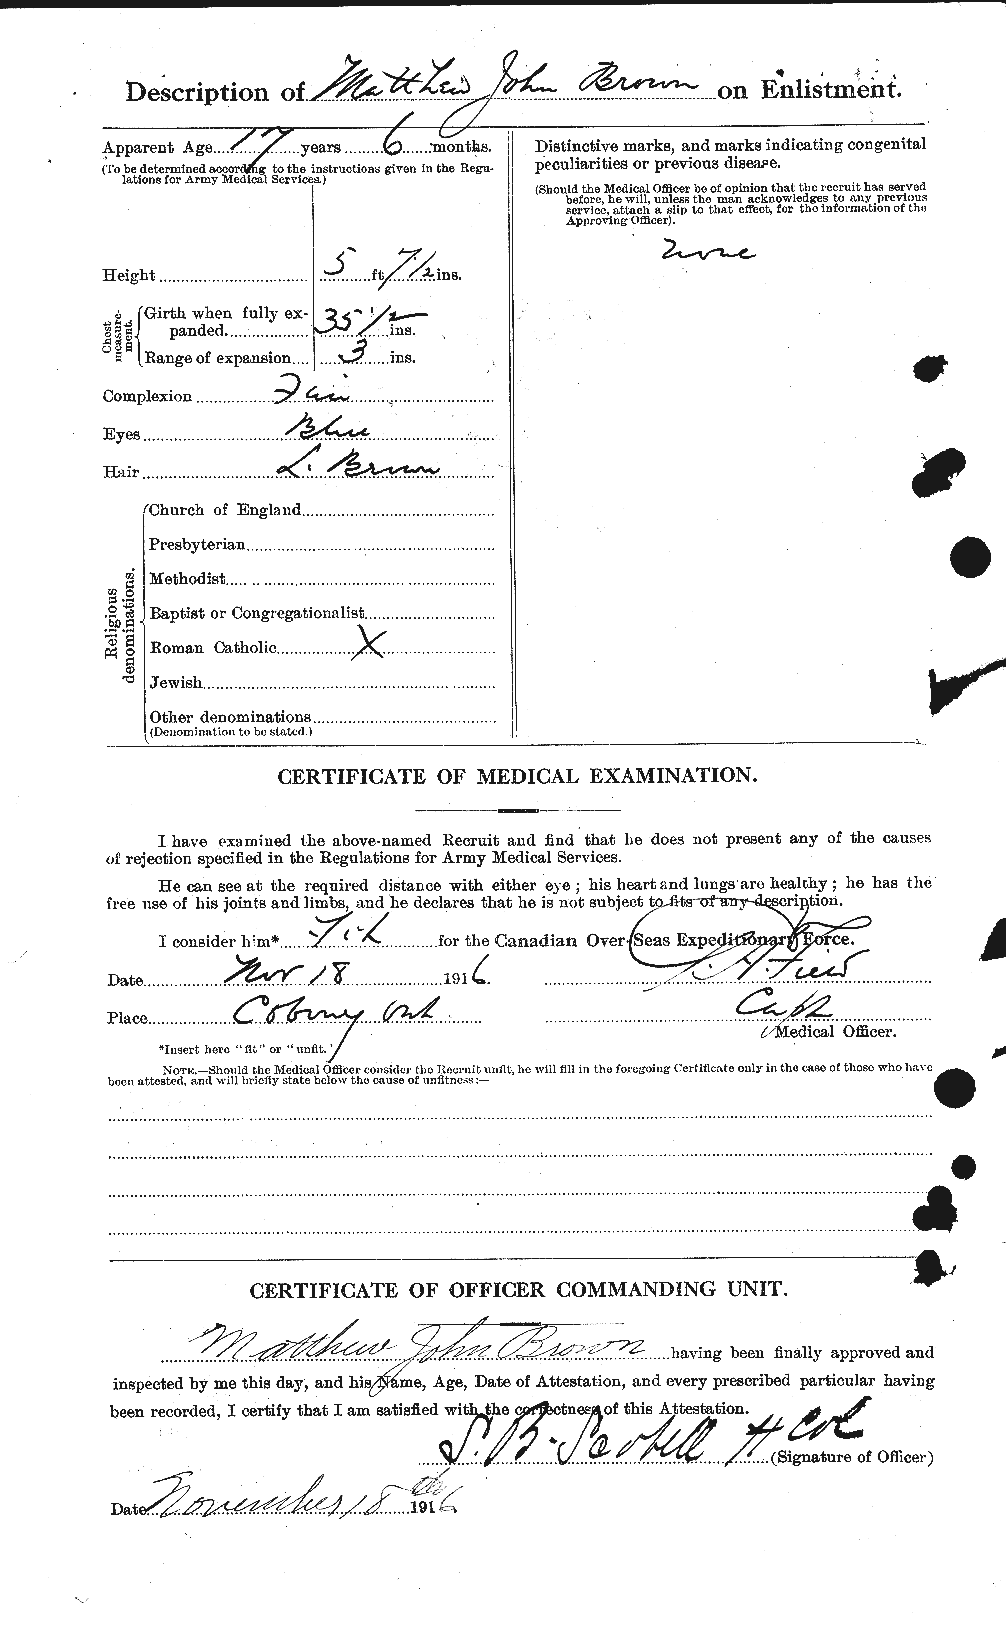 Personnel Records of the First World War - CEF 266371b